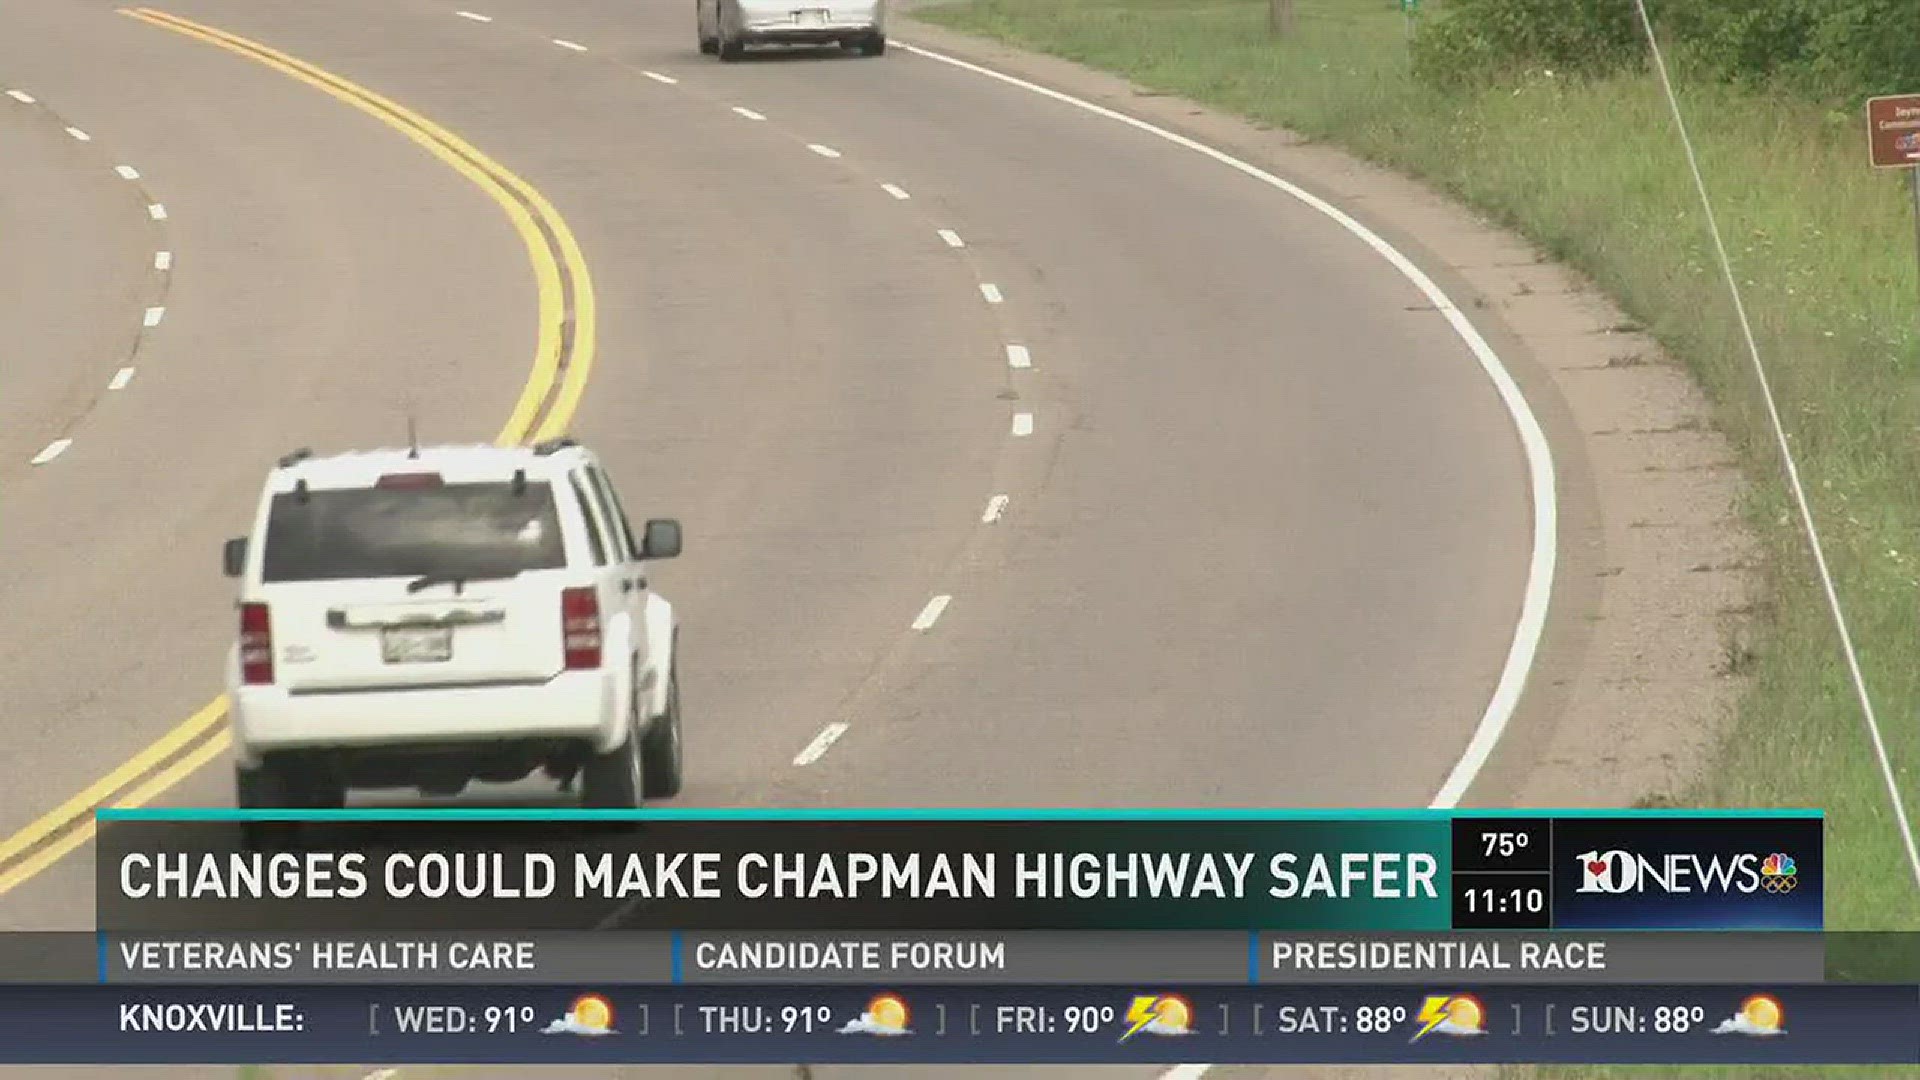 TDOT officials are considering changes to Chapman Highway to make the roadway safer for drivers.